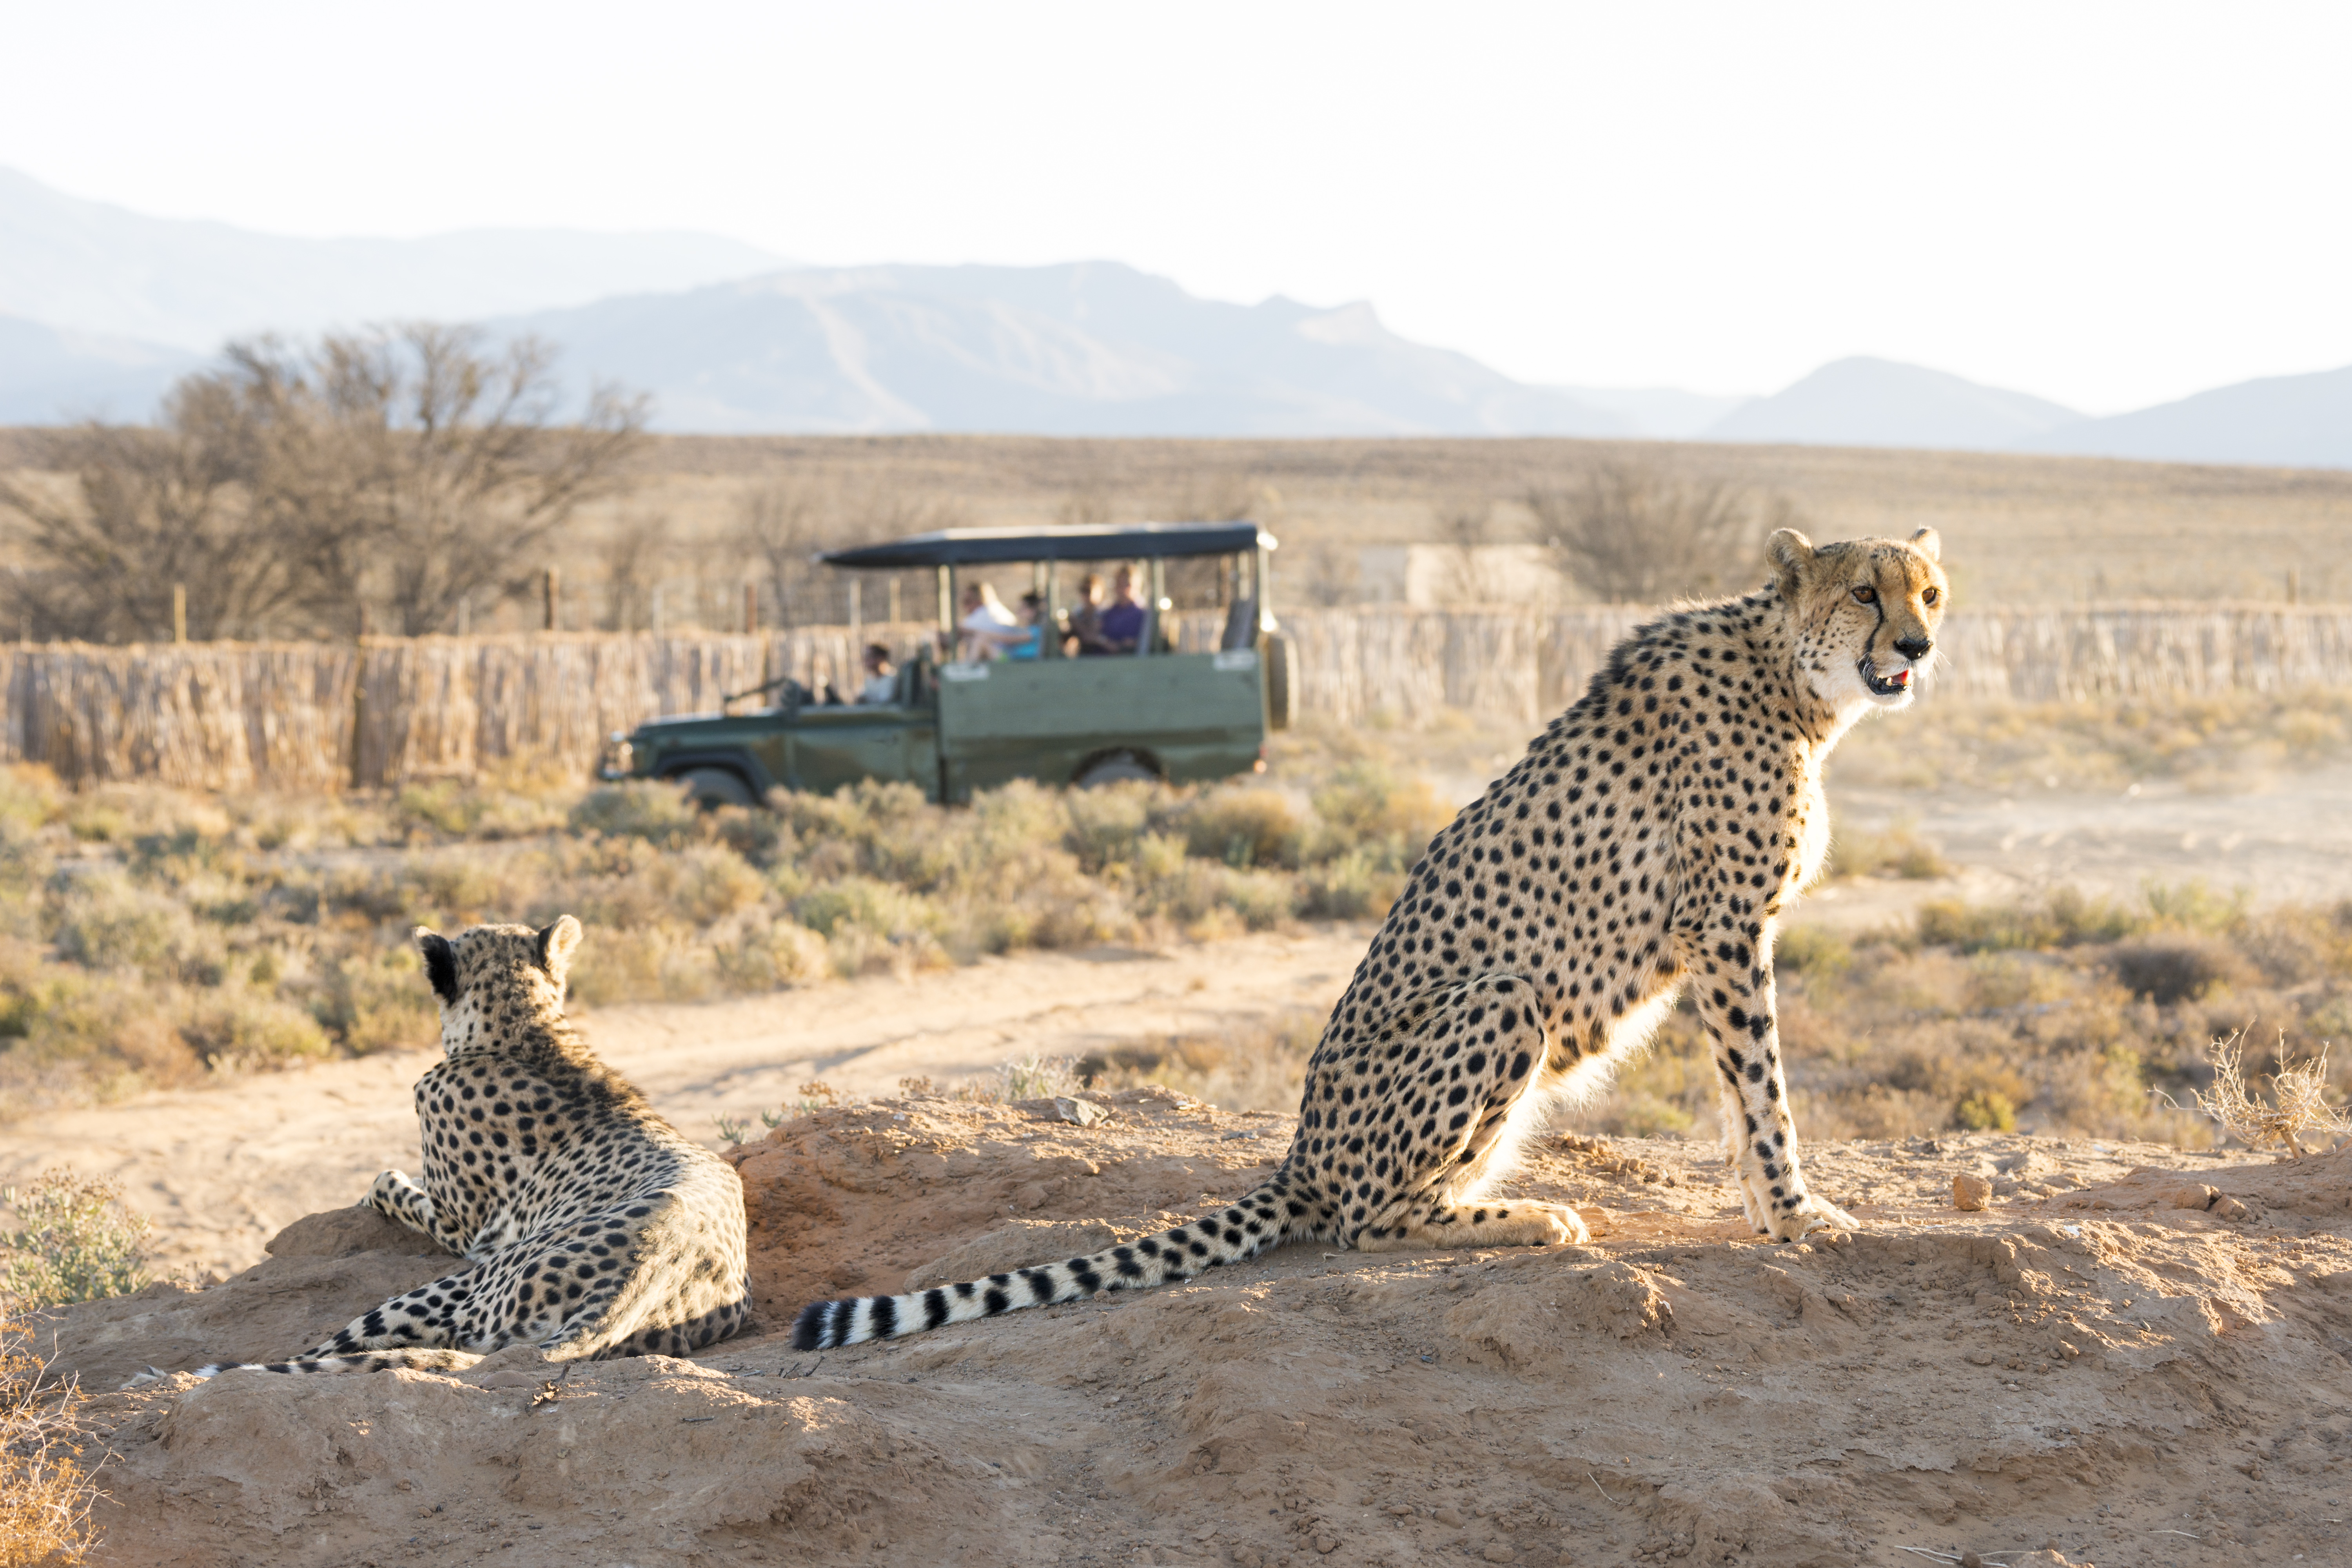 Safari jeep vehicle filled with guide and tourists in background watching two cheetahs (Acinonyx jubatus) in the Karoo desert, Western Cape, South Africa